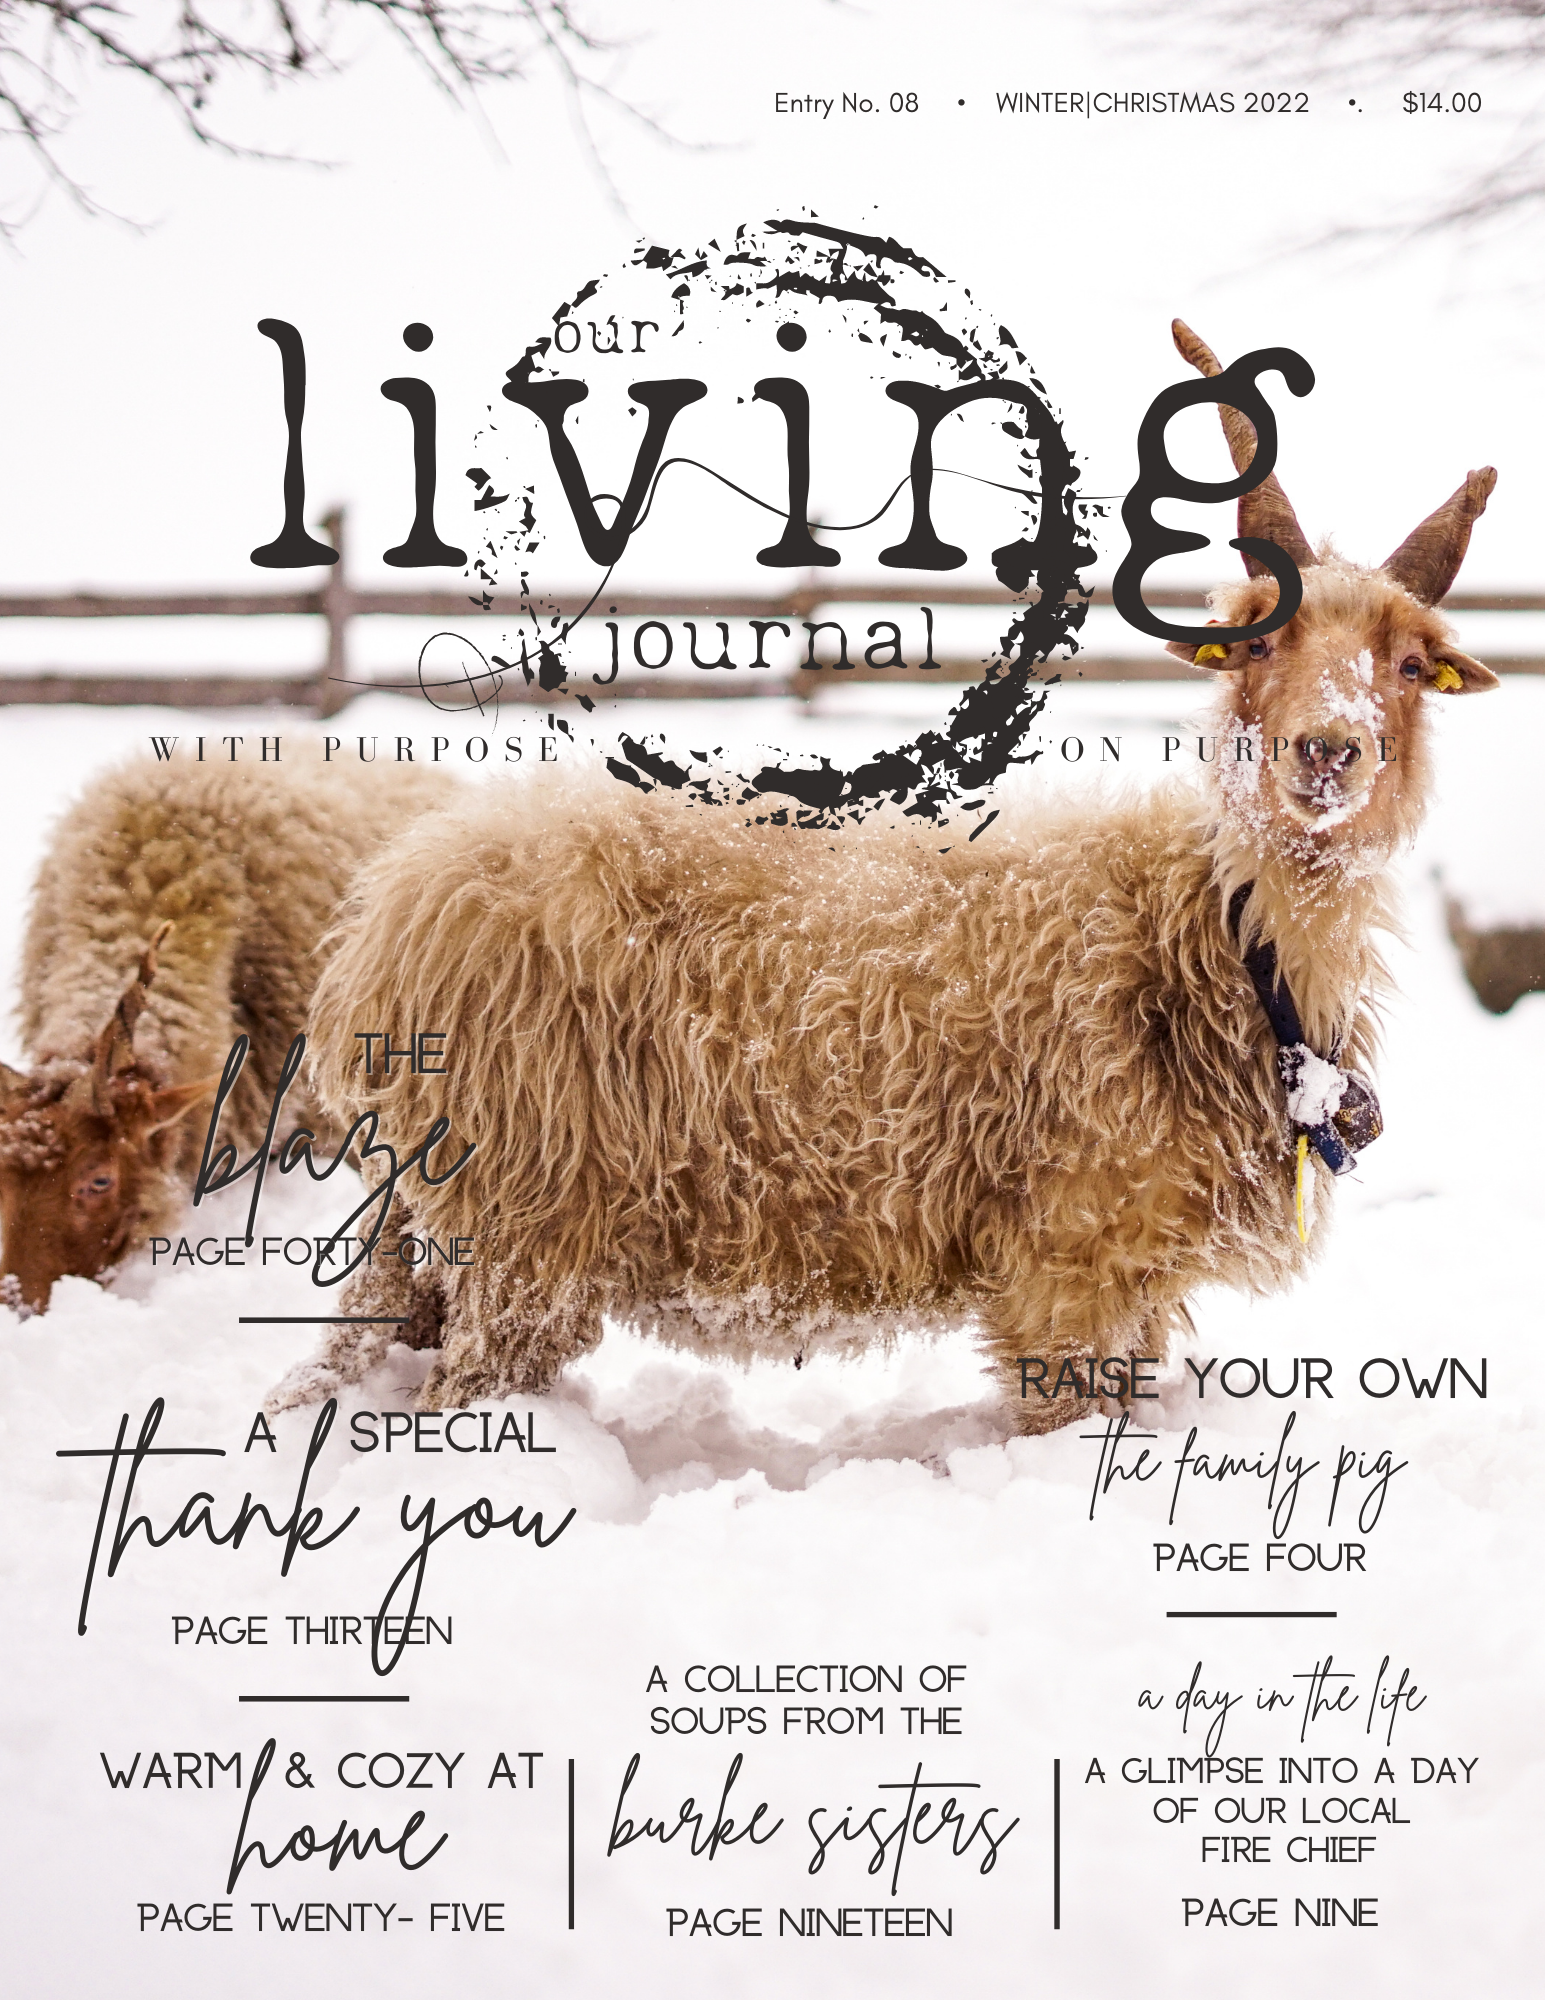 Our Living Journal Entry No. 08 Winter|Christmas